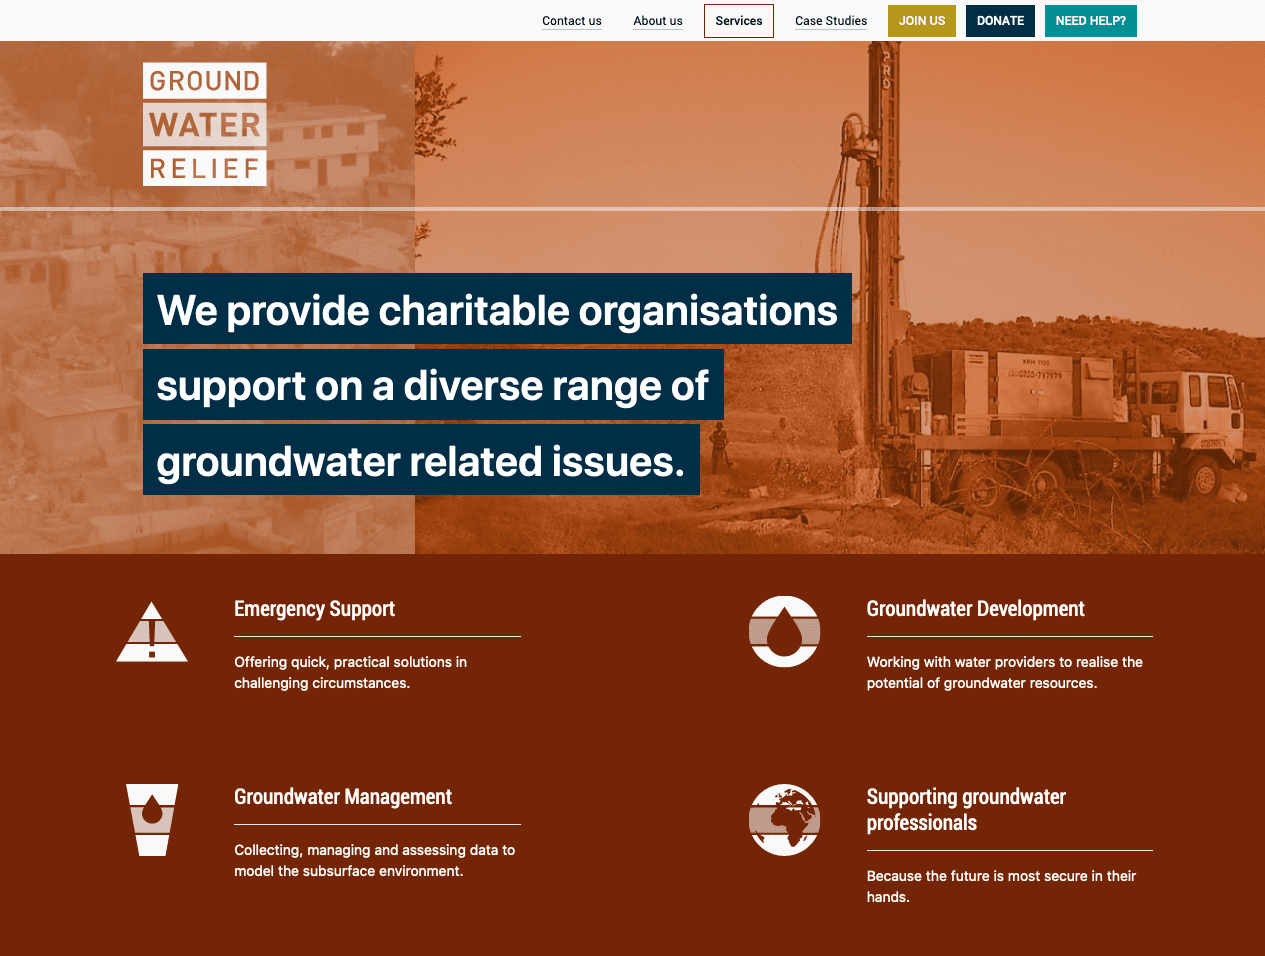 Screenshot from of Groundwater Relief Services page